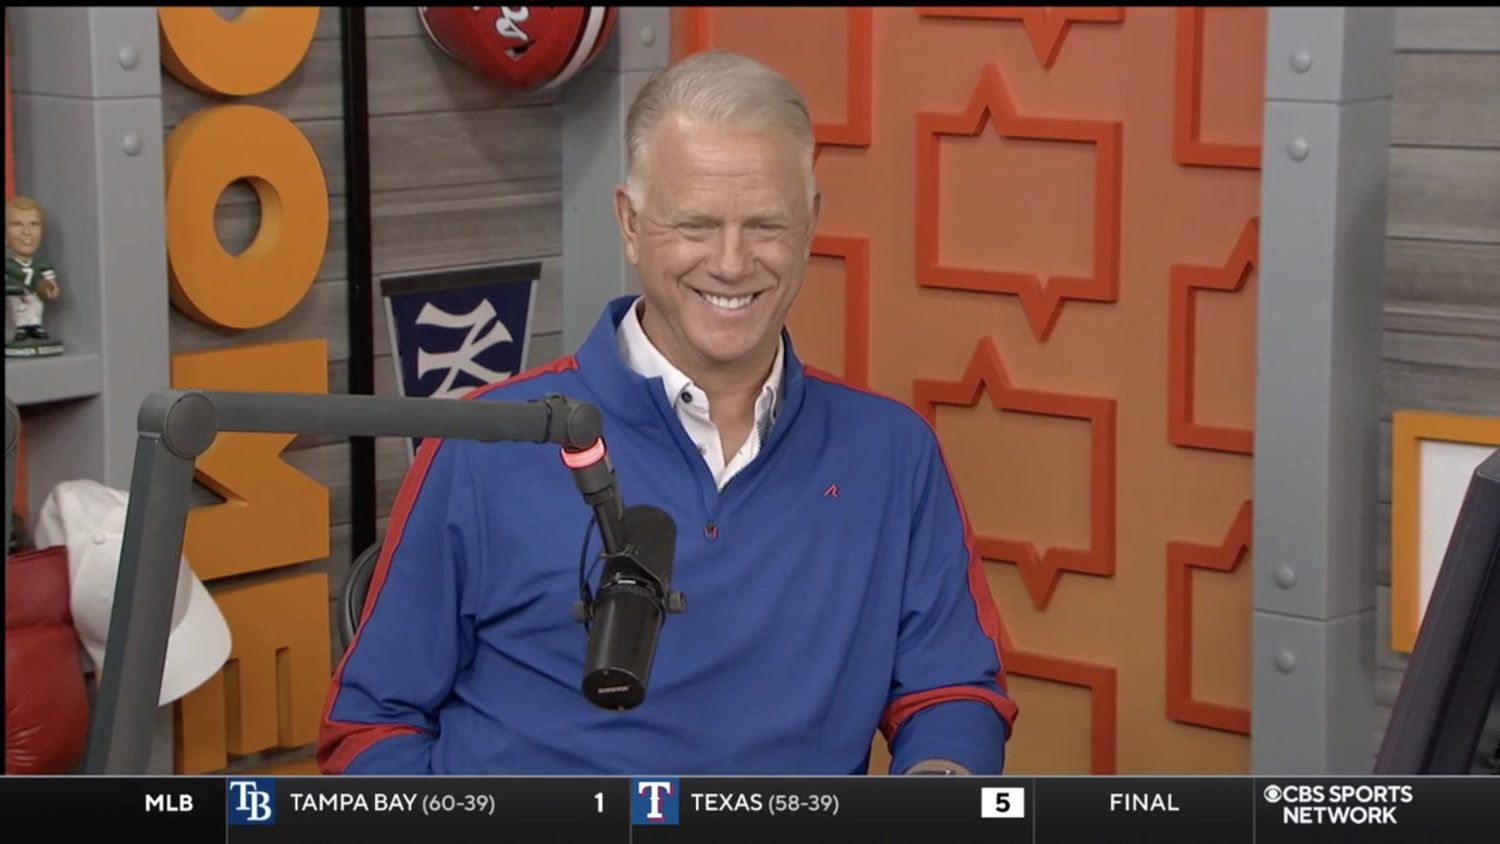 Boomer Esiason on WFAN and CBS Sports Network